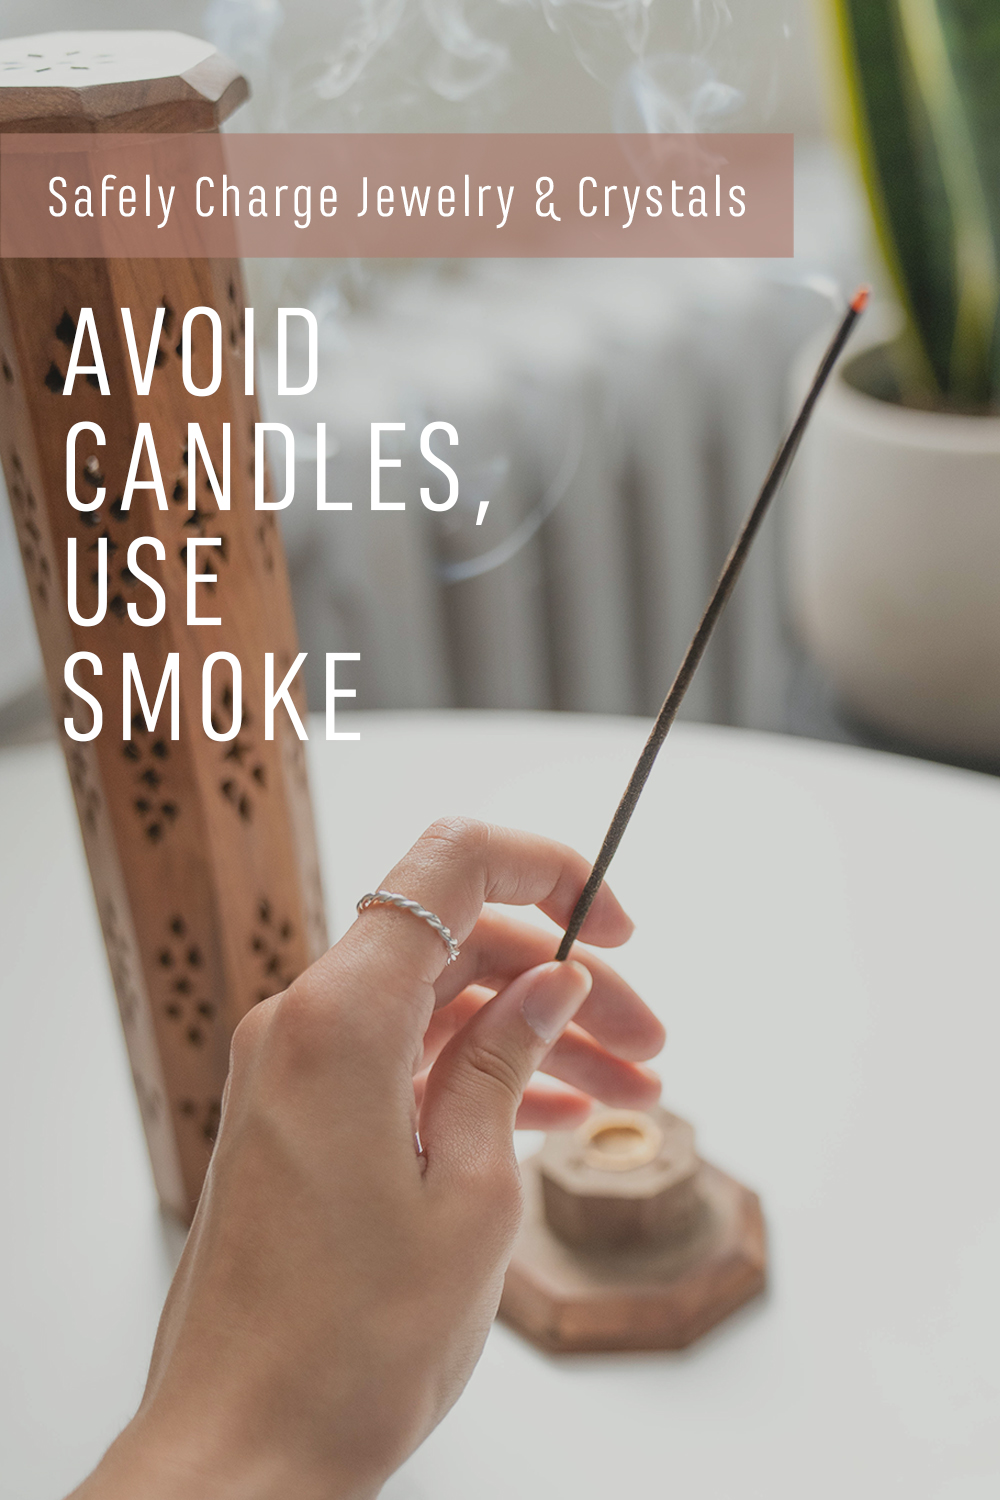 How to charge jewelry and crystals with smoke